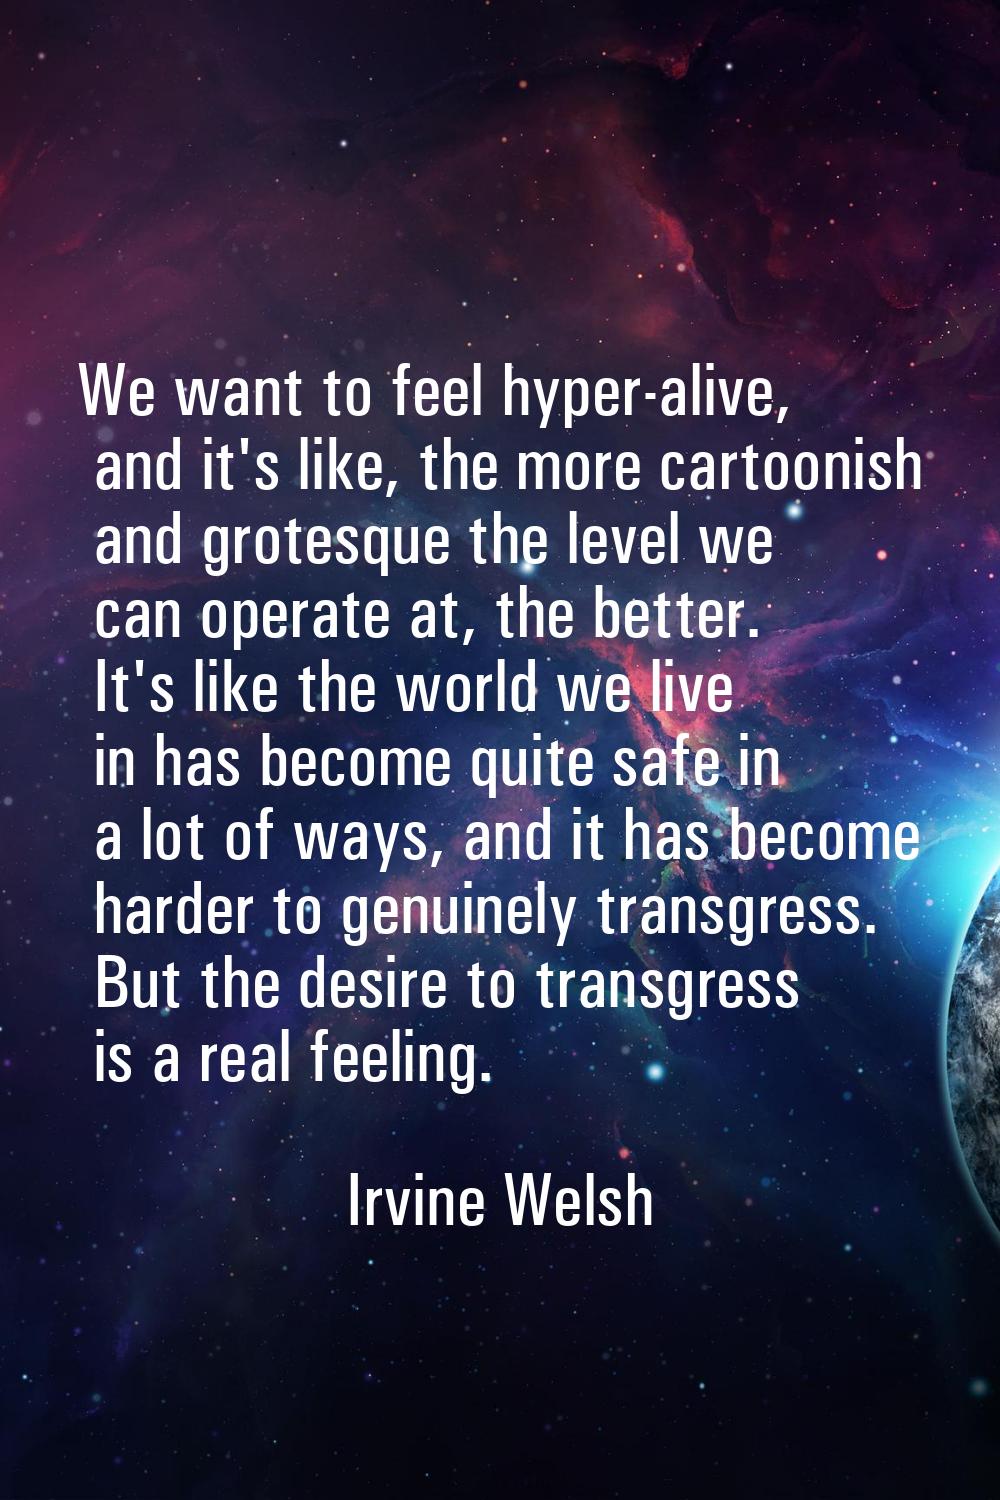 We want to feel hyper-alive, and it's like, the more cartoonish and grotesque the level we can oper